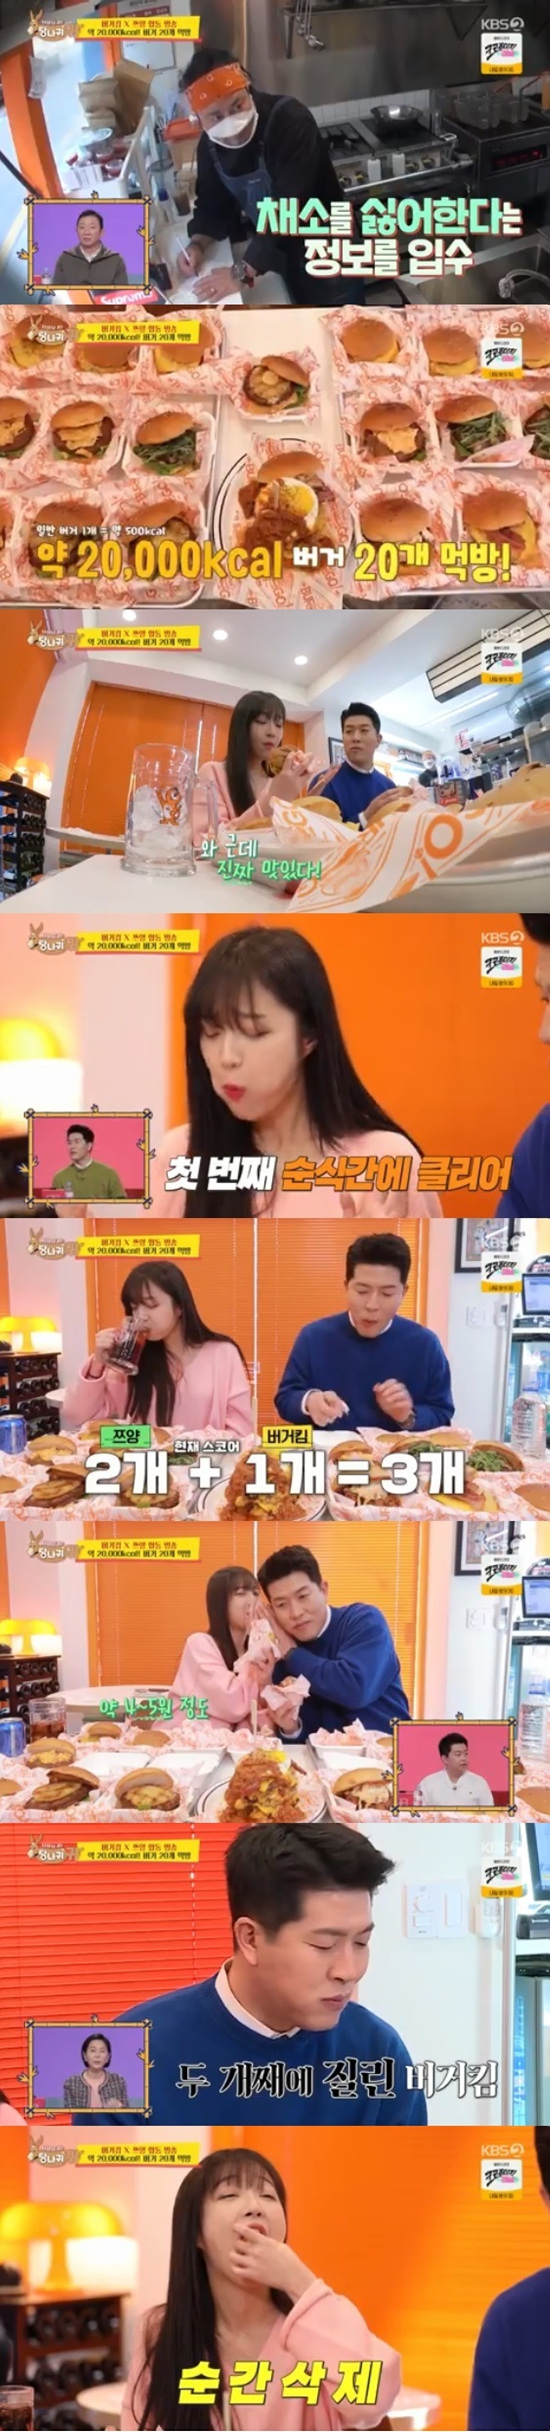 Tzuyang presented 20 hamburgers with 20,000 calories.On KBS 2TV Boss in the Mirror broadcasted on the 13th, tzuyang was visiting Kim Byung-hyuns hamburger shop.Kim Byung-hyun challenged the shooting of 20 hamburgers with the food creator tzuyang ahead of the official opening.Kim Byung-hyun, the chef in charge of hamburgers at the store, unveiled a so-called Tsuburger, which was specially prepared for tzuyang.When he heard that tzuyang hated vegetables, he sprouted vegetables into hamburgers and sprinkled five chicken patties and beef patties, homemade bacon and egg fries with chili sauce.The chef in charge of hamburgers explained that the zumburger is 10,000 calories.Tzuyang took a bite of the zuberger and said, The outside is crisp, but the inside is moist. It is delicious.Kim Byung-hyun started eating hamburgers like tzuyang, but he was not eating one even while he ate two hamburgers.Kim Byung-hyun said he should disturb when he saw Tzuyang eating.Kim Byung-hyun asked tzuyang, I have one question, but how much is the profit if you look at 1 billion.Tzuyang hesitated, troubled by the talk of the Nutub profits. Kim Byung-hyun asked for a rough notice.Tzuyang informed Kim Byung-hyun in his whisper, about four or five One per inquiry.Kim Byung-hyun was surprised to calculate on his cell phone and suddenly called tzuyang sister.Kim Byung-hyun was greedy for the tube after learning that tzuyang had been doing the tube for three years.Tzuyang said, Did not you buy more than me?Kim Byung-hyun showed a sickening face on the second hamburger, with Kim Byung-hyun in the studio saying: I dont like flour.I dont like hamburgers very much. He said, You should say you like hamburgers. You stupid fool.Kim Byung-hyun made a gag with a hard time keeping hamburger food. Tzuyang said in an interview with Kim Byung-hyun, I almost played.I thought it would be like that if my head hurts and my manager is there. Kim Byung-hyun ate three hamburgers and finished his meal; tzuyang was eating nine cans of soda as well as breaking 15 hamburgers.Tzuyang ate one of the last remaining zuburgers deliciously, and later he sprinkled extra cheese sauce and succeeded in eating 20 hamburgers neatly.Photo: KBS Broadcasting Screen